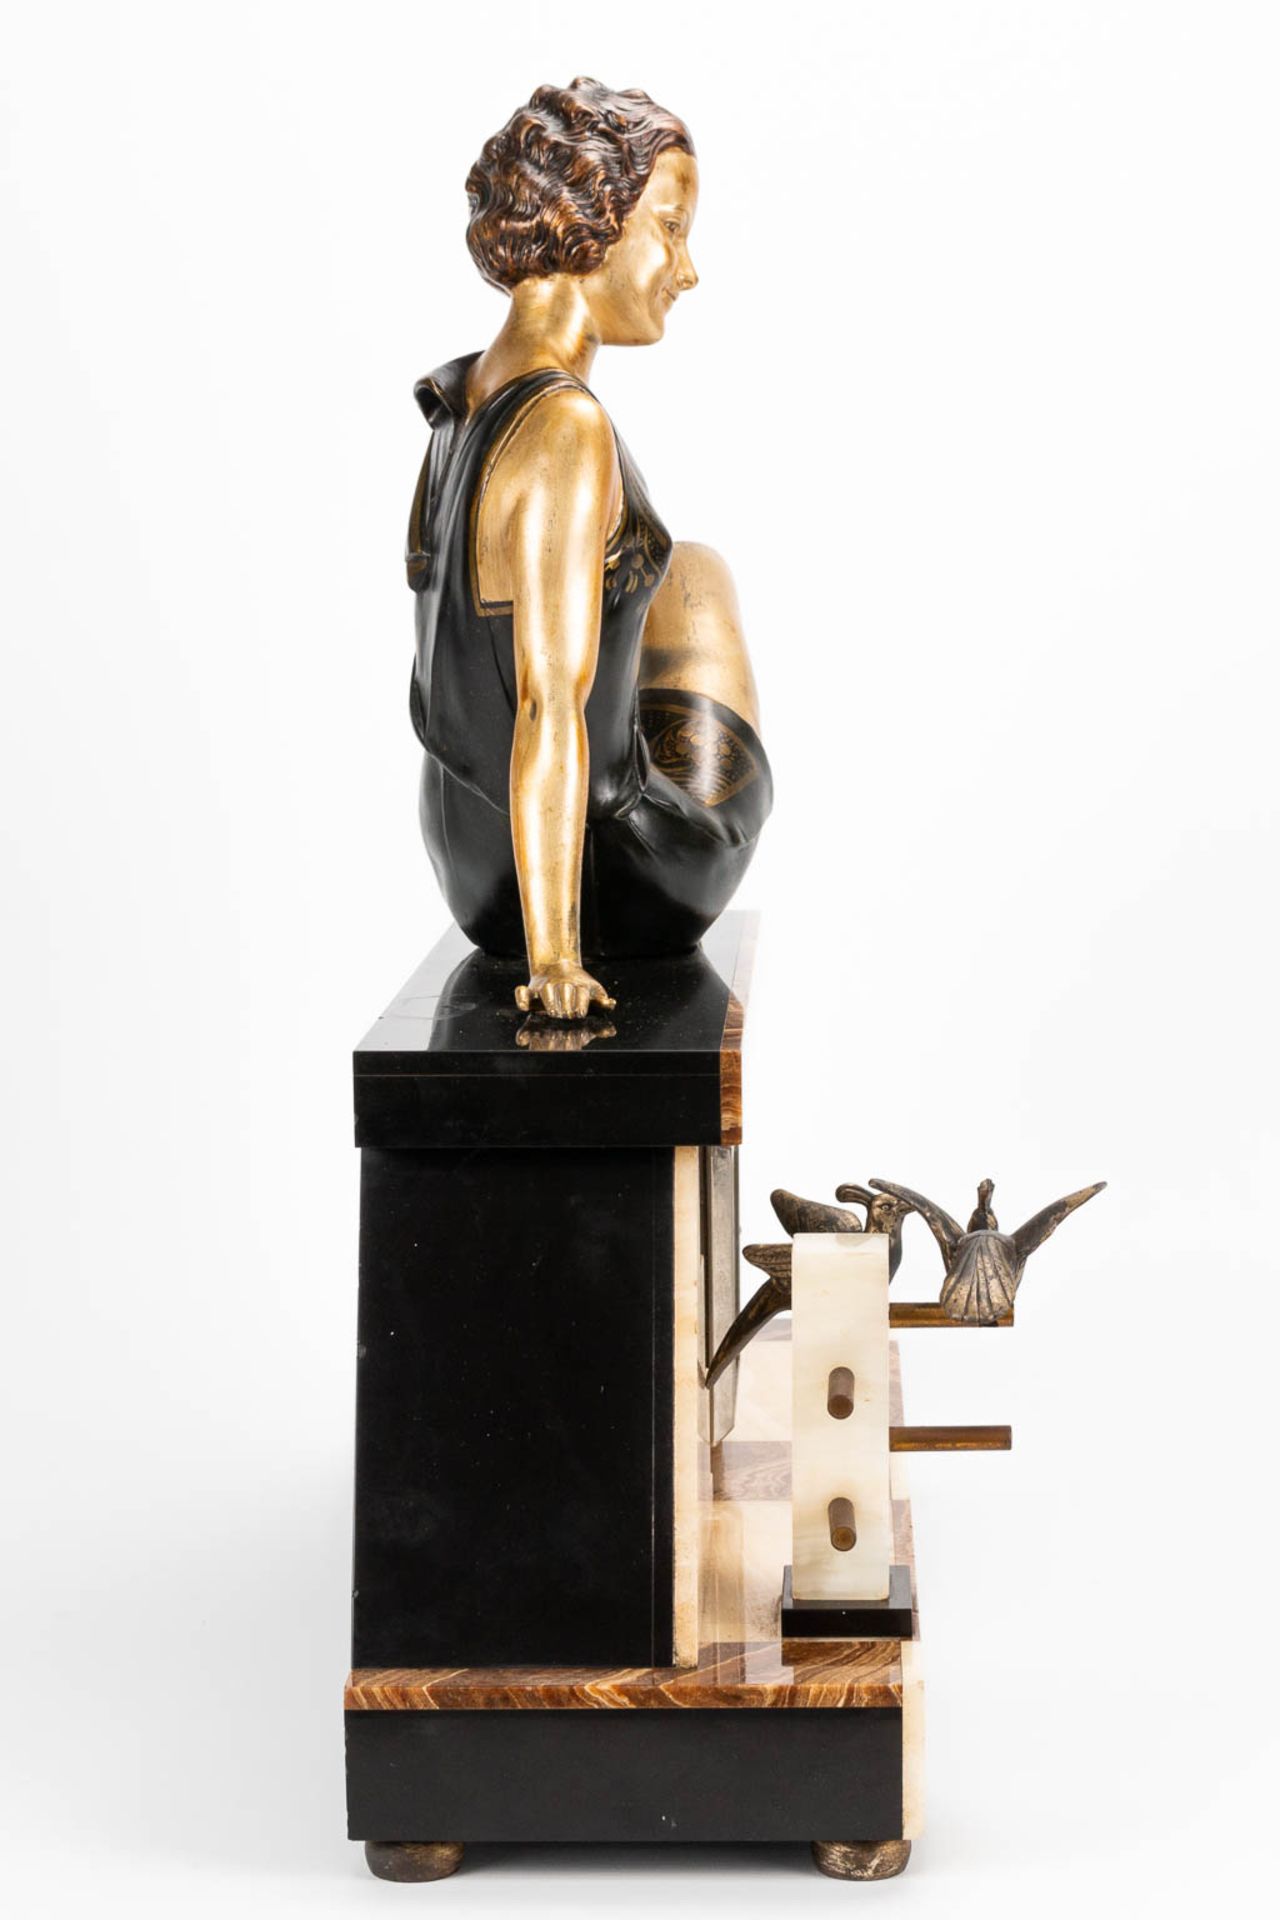 Enrique MOLINS-BALLESTE (1893-1958) A clock made of alabaster and onyx in Art Deco style, with a spe - Image 2 of 11